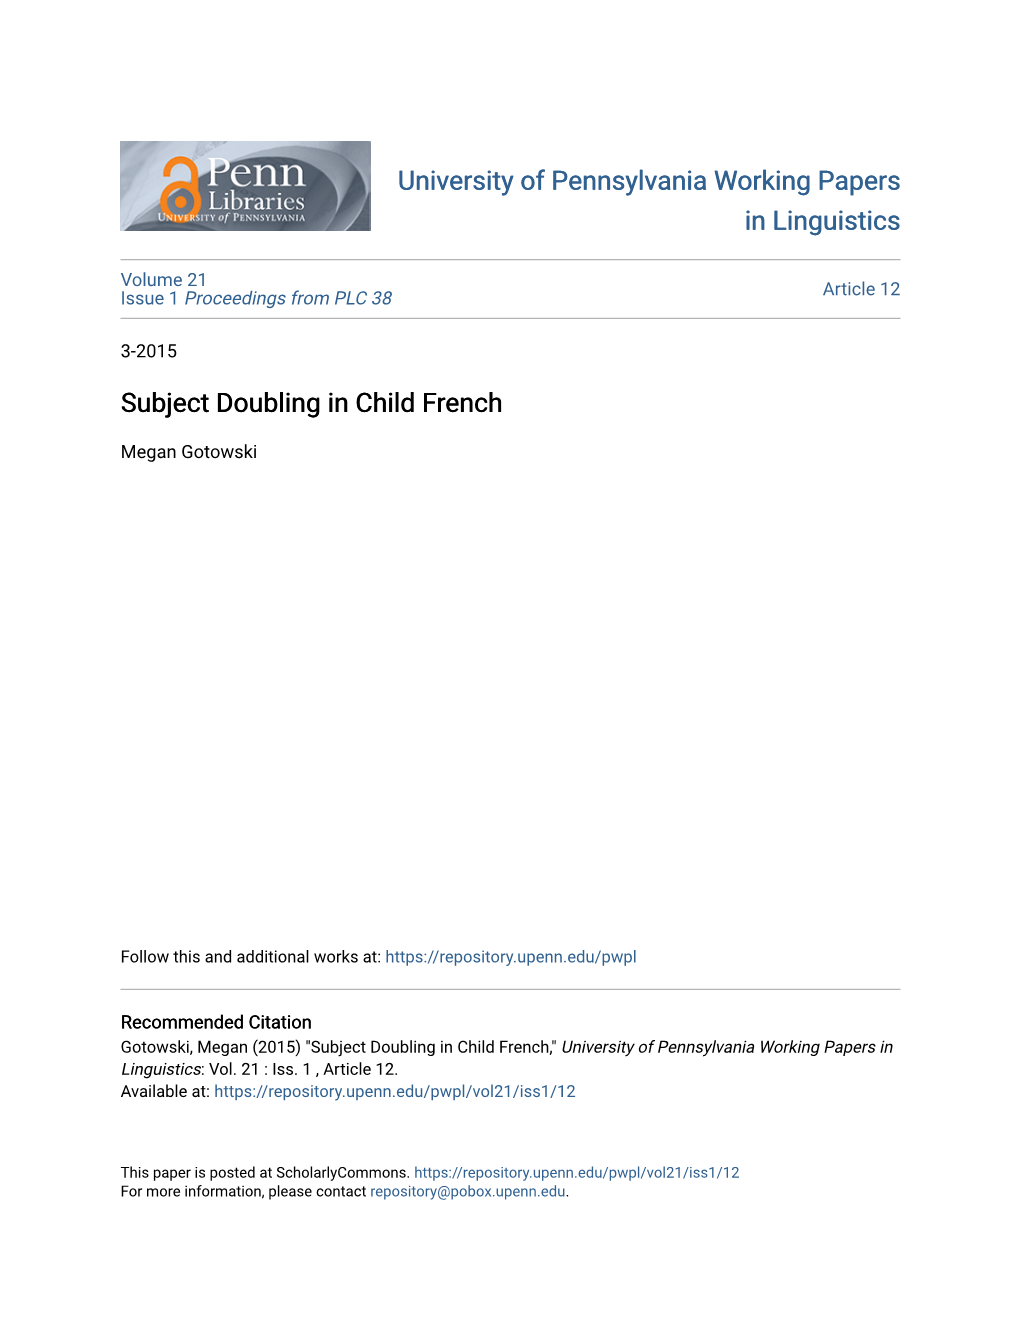 Subject Doubling in Child French